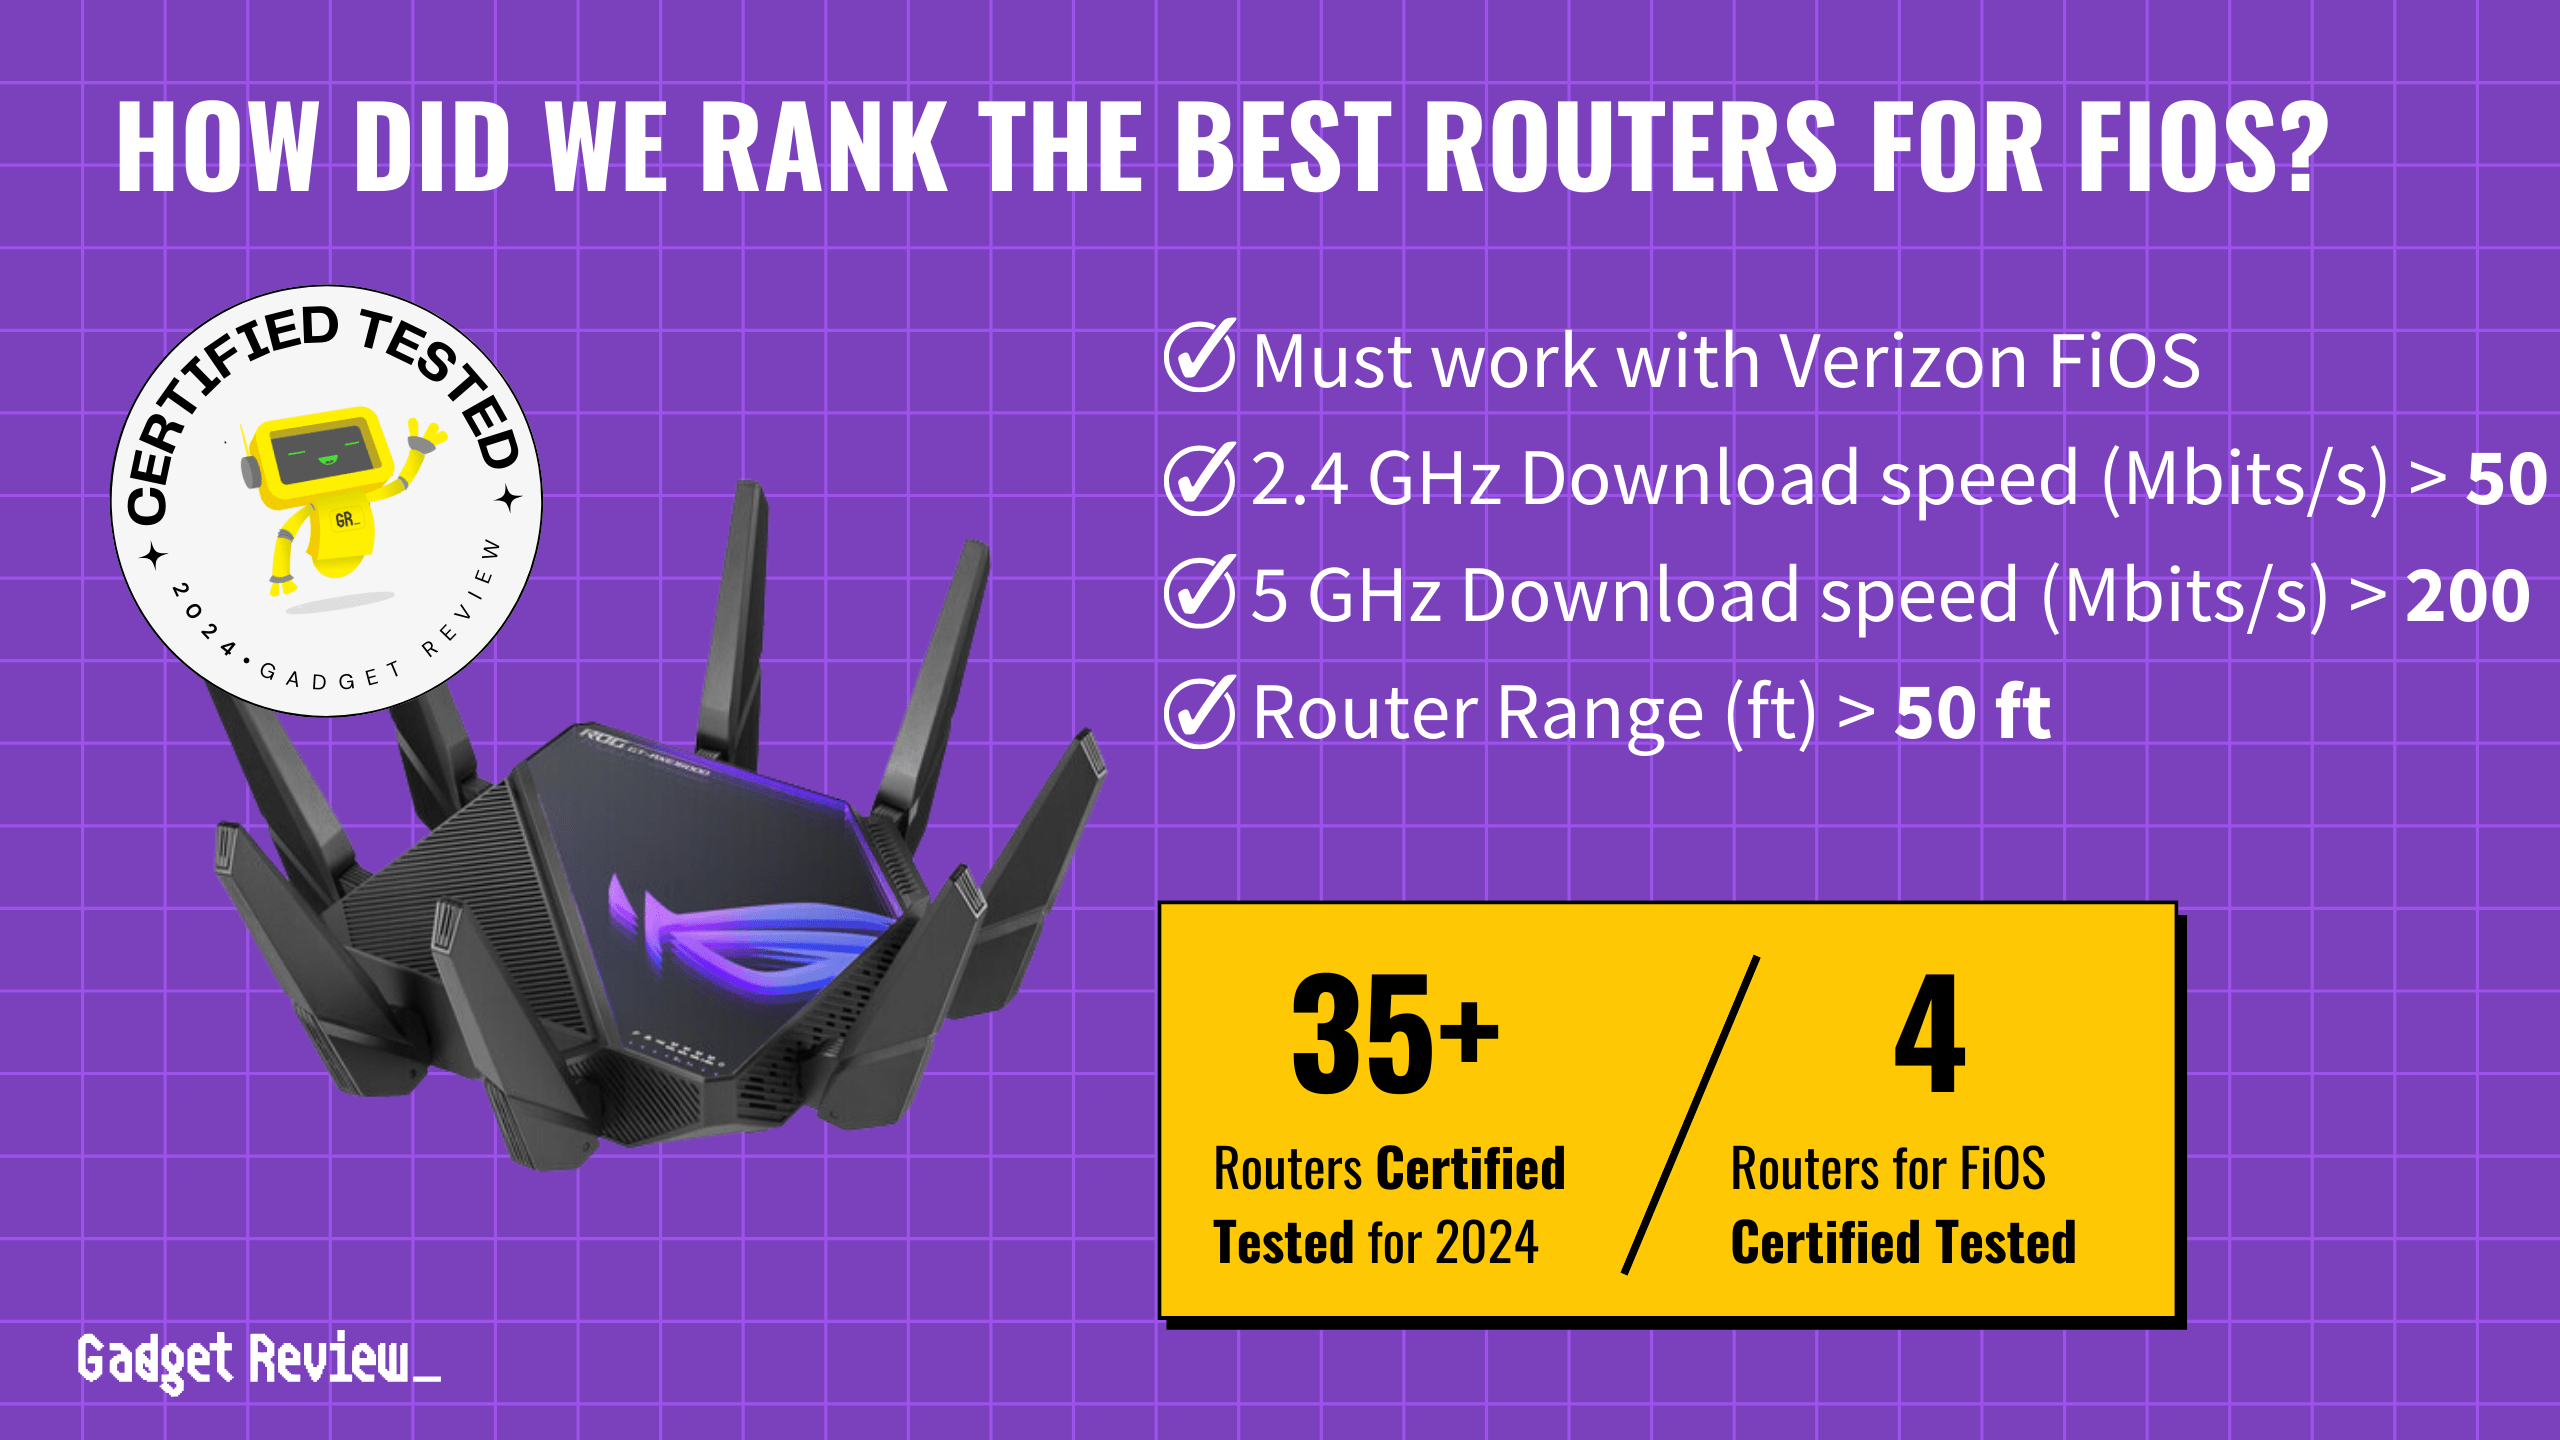 4 Top Routers for Fios of 2024 Ranked